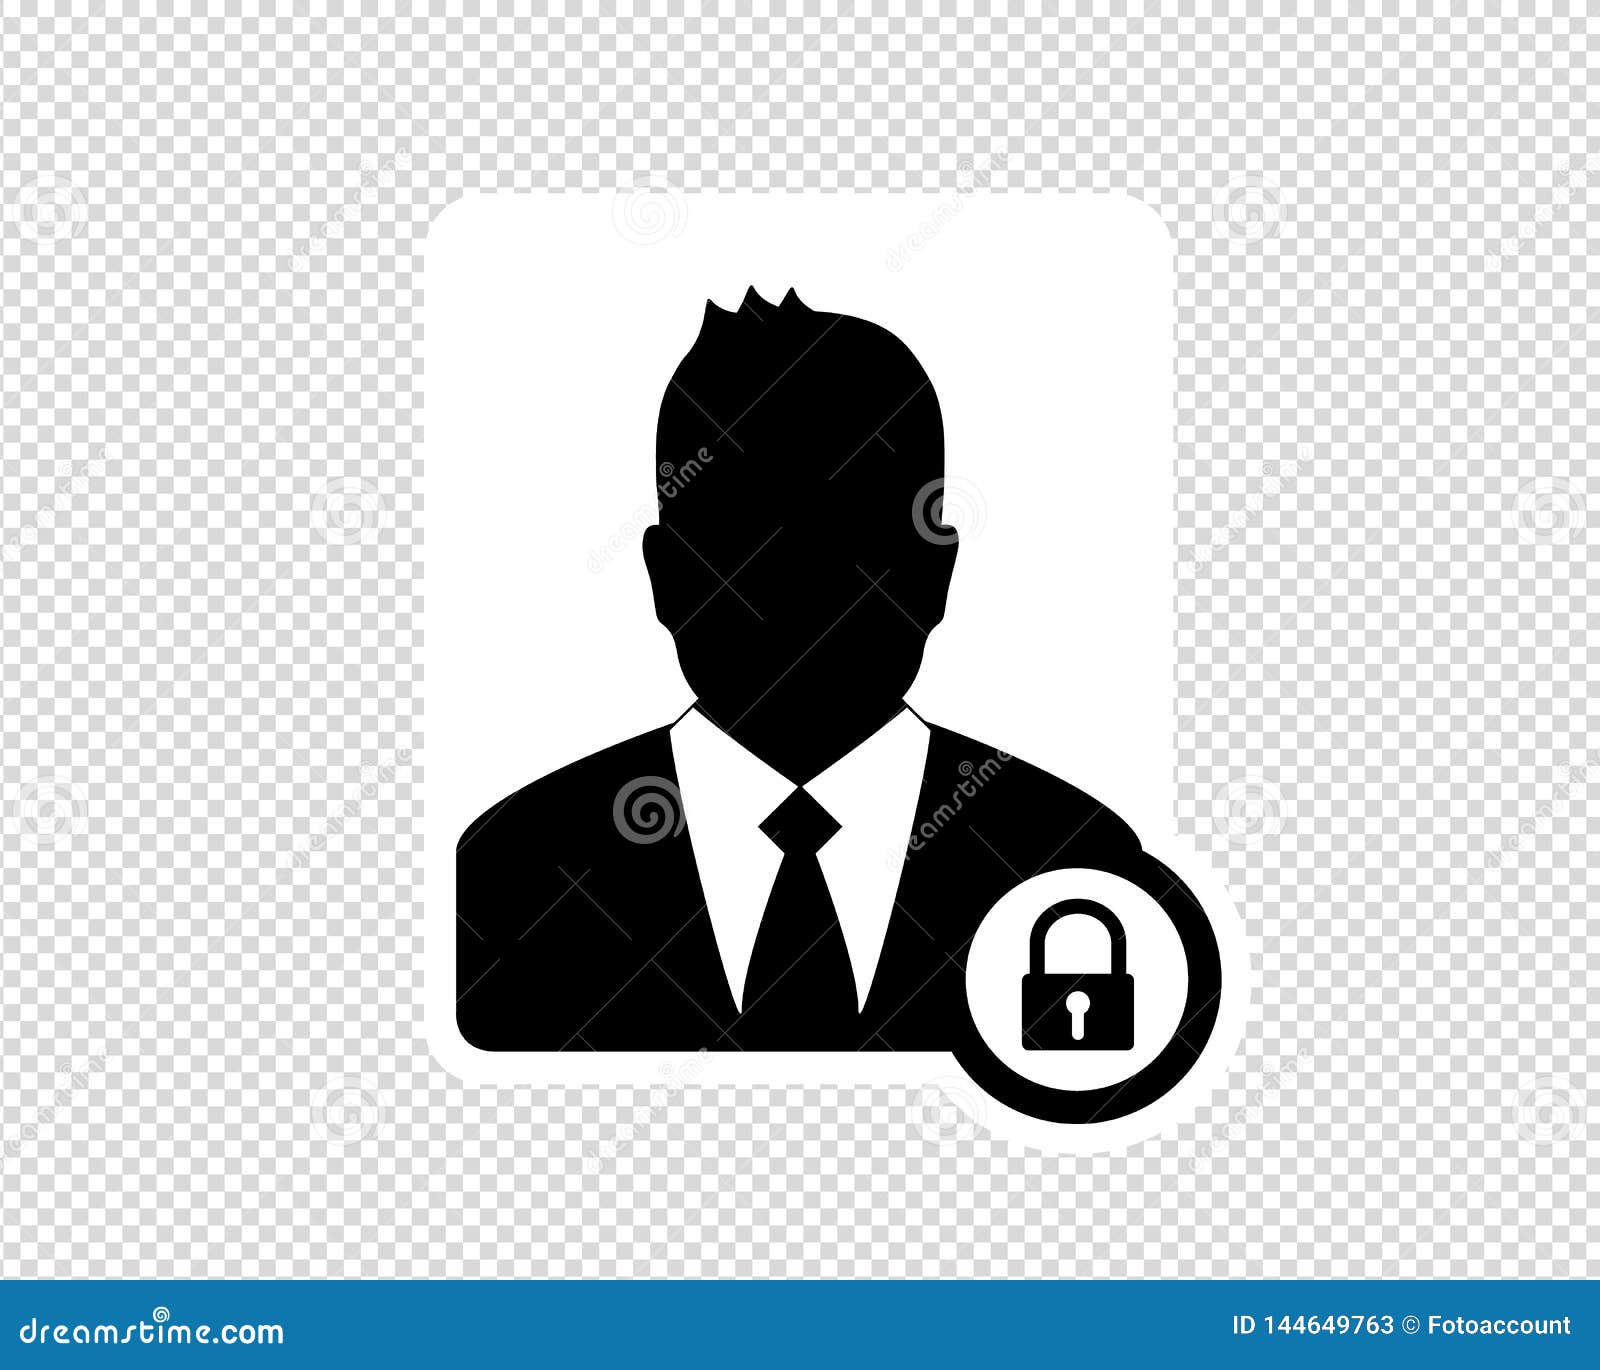 Profile Icon Silhouette PNG Transparent, Avatar Icon Profile Icon Member  Login Vector Isolated, Login Icons, Profile Icons, Avatar Icons PNG Image  For Free Down…